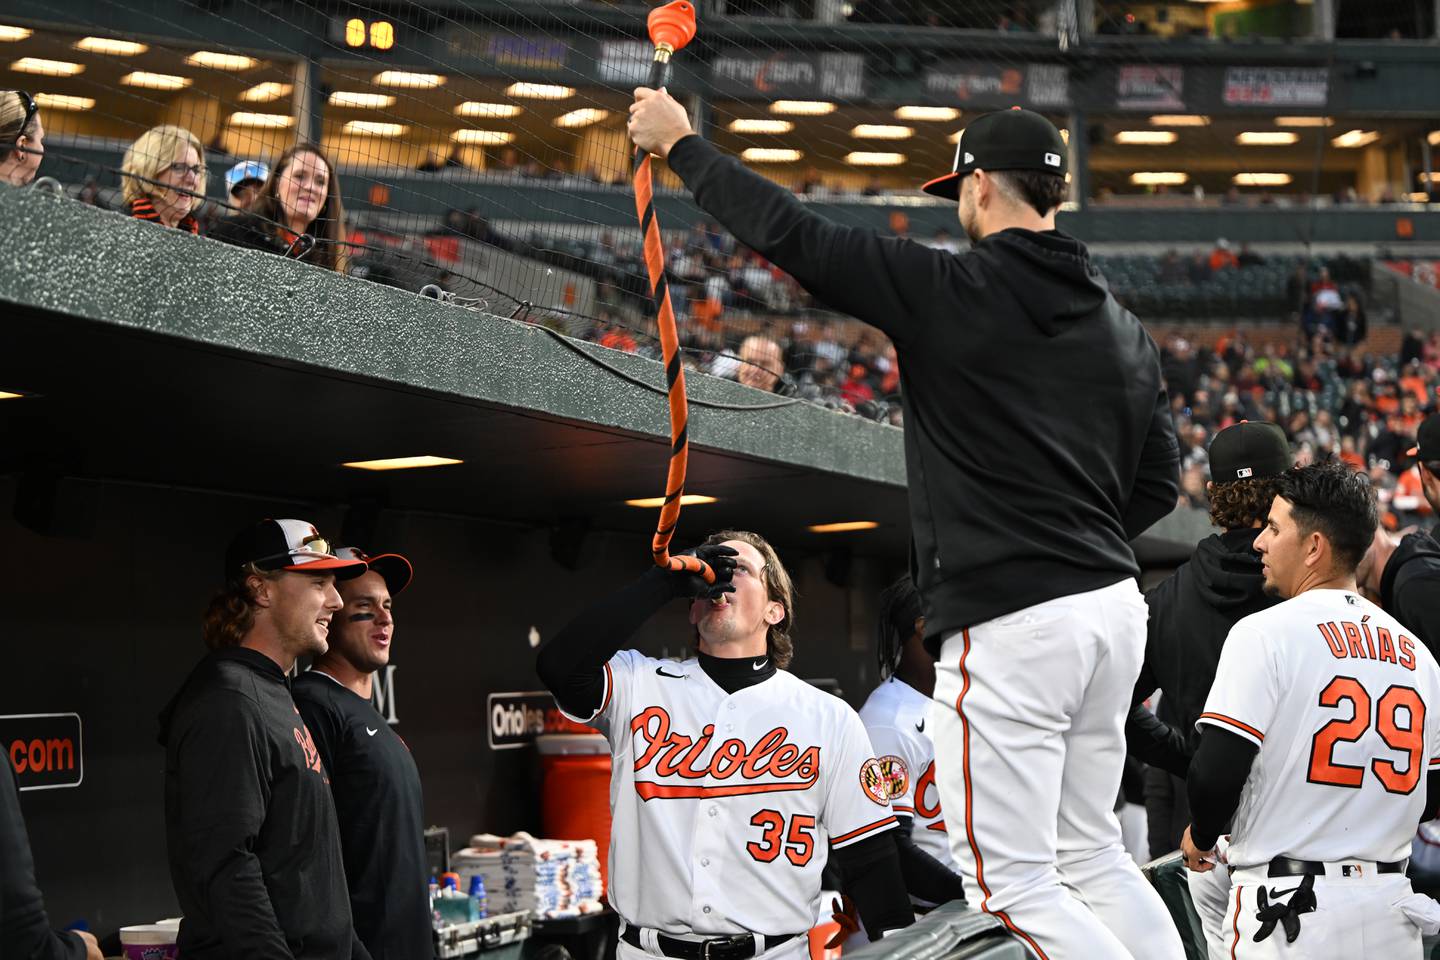 Baltimore Orioles’ Adley Rutschmann smiles as he drinks from the home run funnel after hitting a solo homer against the Oakland Athletics in the third inning of a baseball game on Monday, April 10, 2023, in Baltimore.